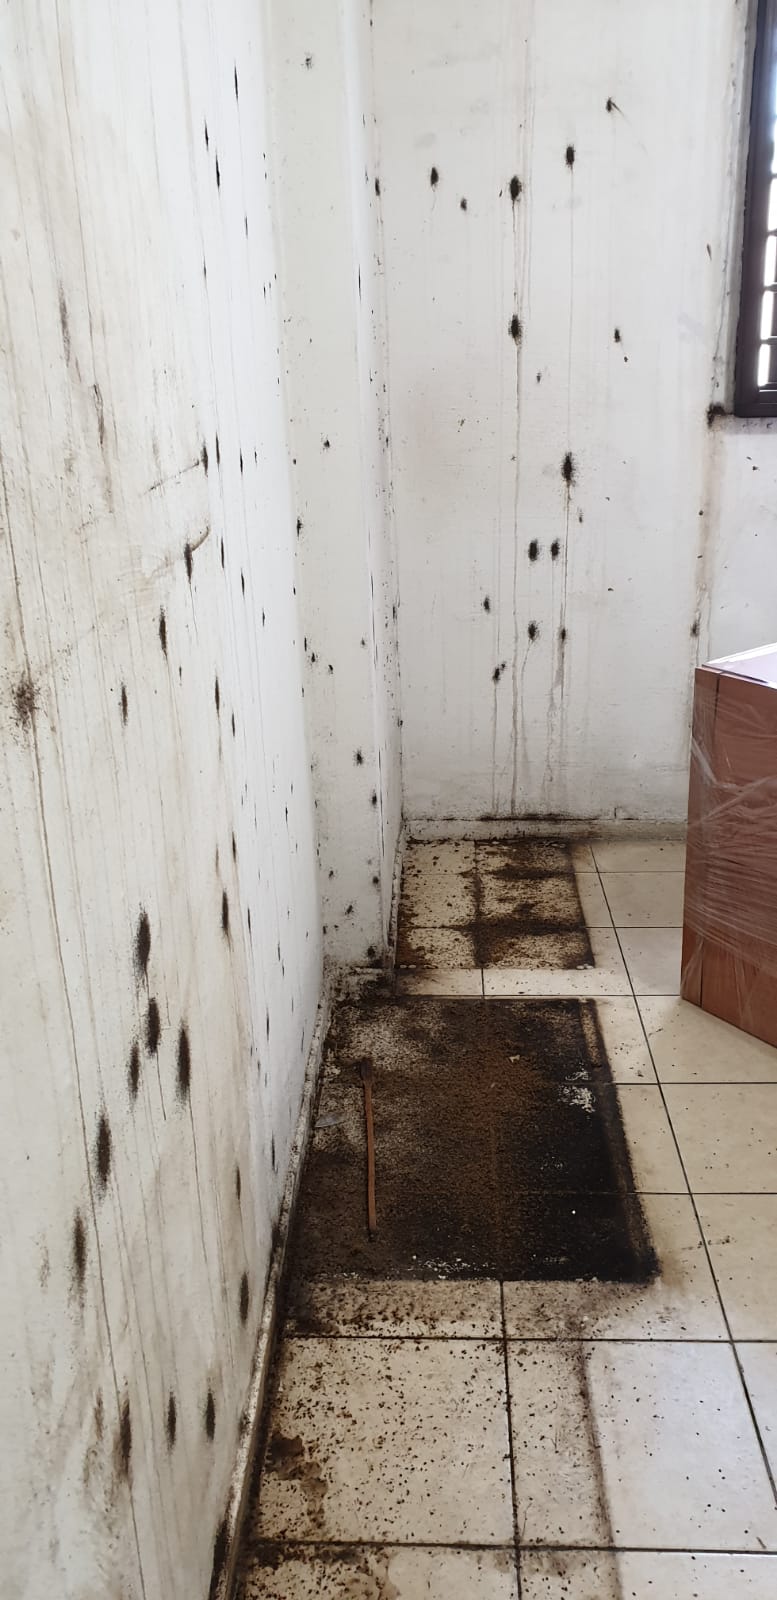 Bedbug infestation in a flat in Chinatown